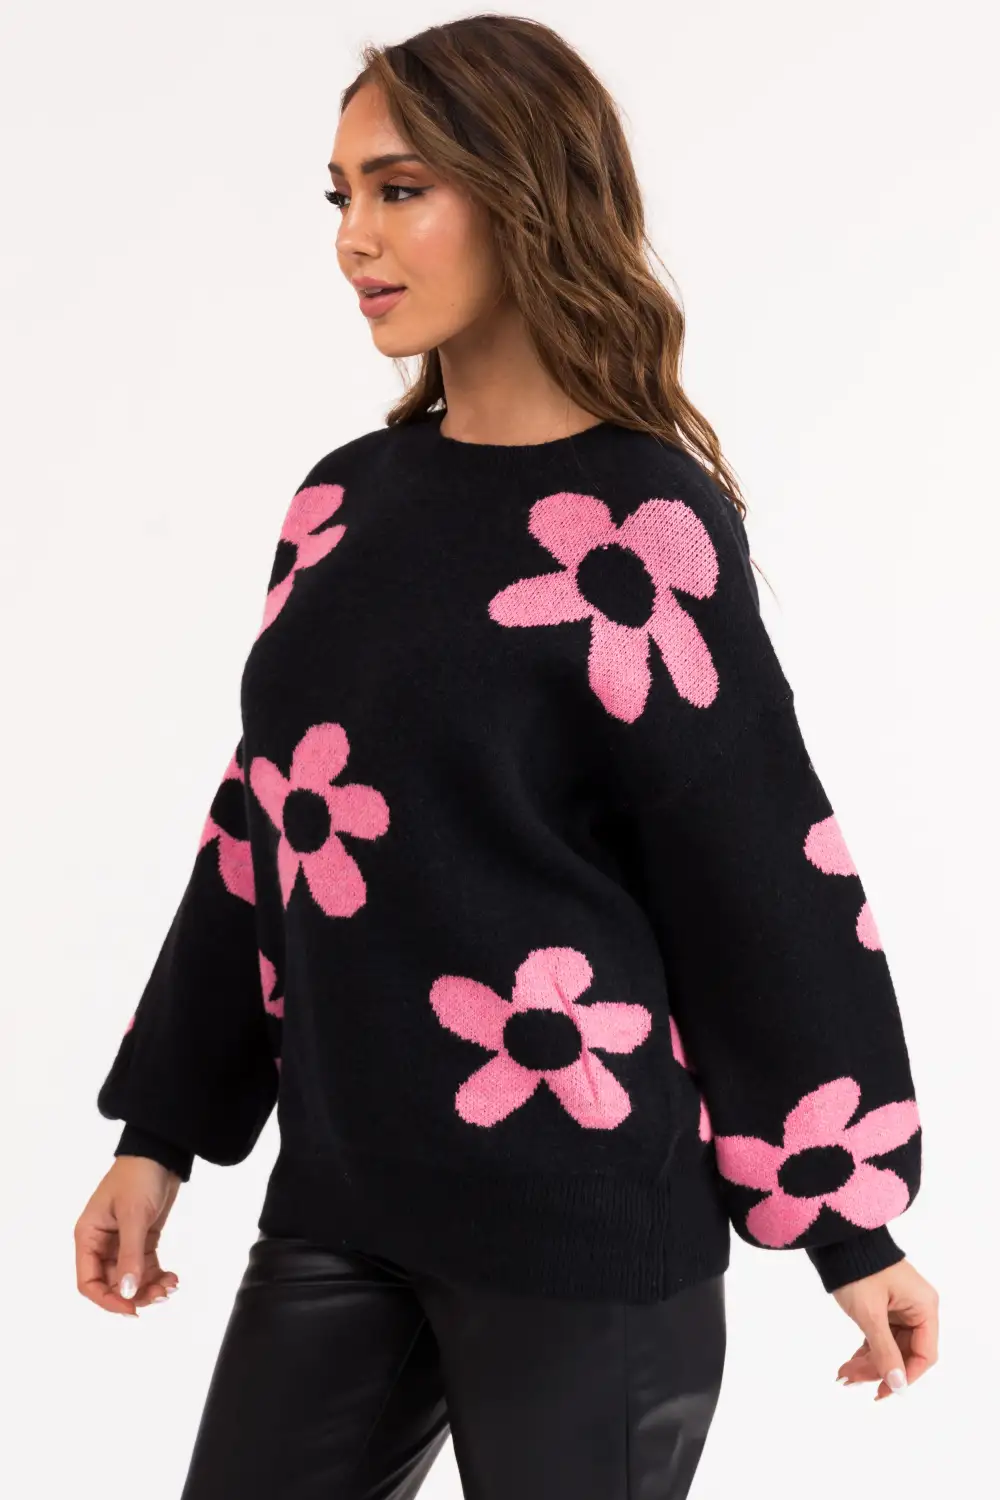 Black and Baby Pink Floral Print Knit Sweater